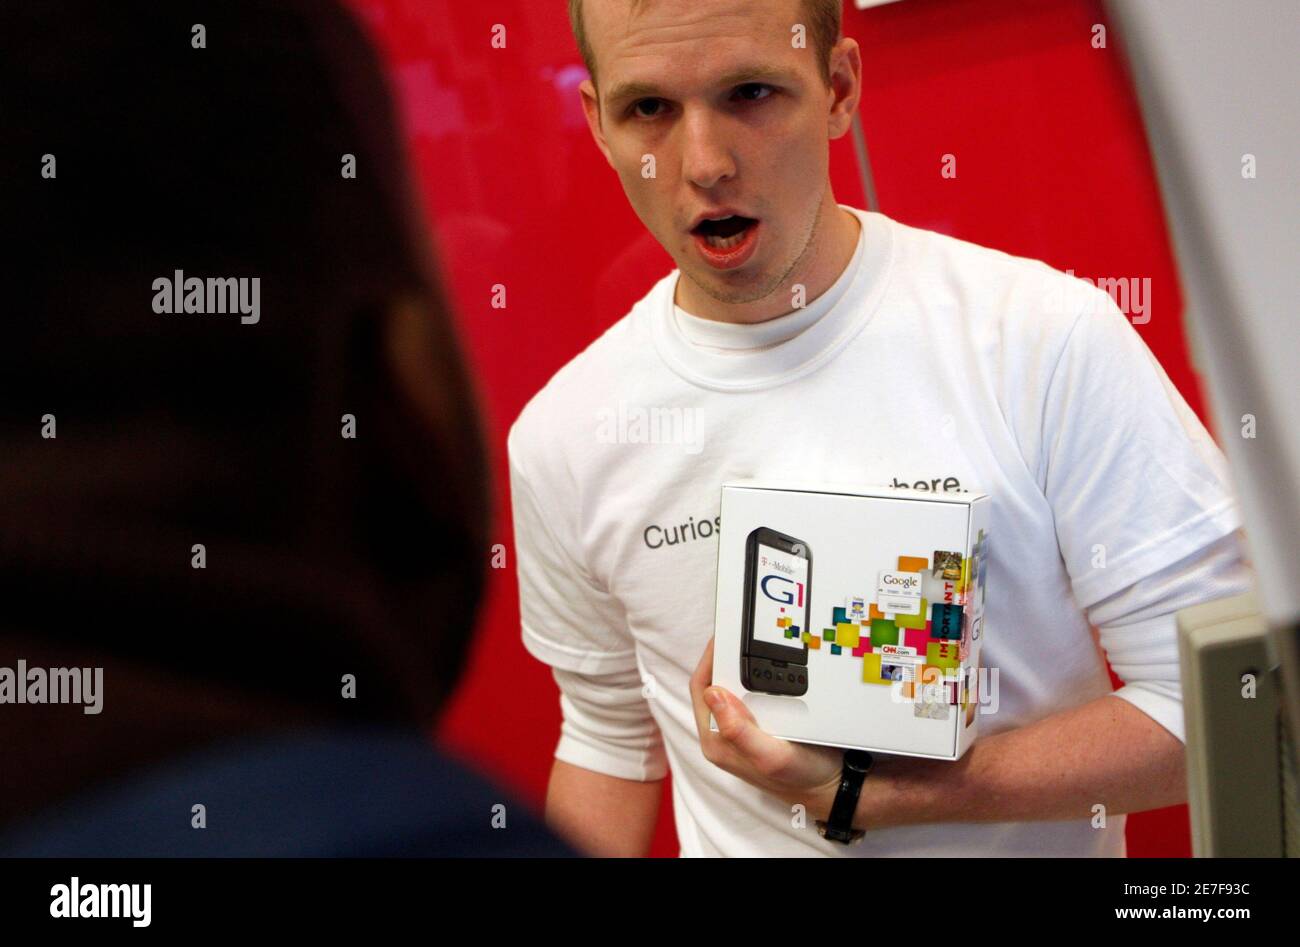 A T-Mobile employee holds the new G1 mobile telephone box as he speaks with a customer at a T-Mobile store in New York City, October 22, 2008.  REUTERS/Mike Segar  (UNITED STATES) Stock Photo